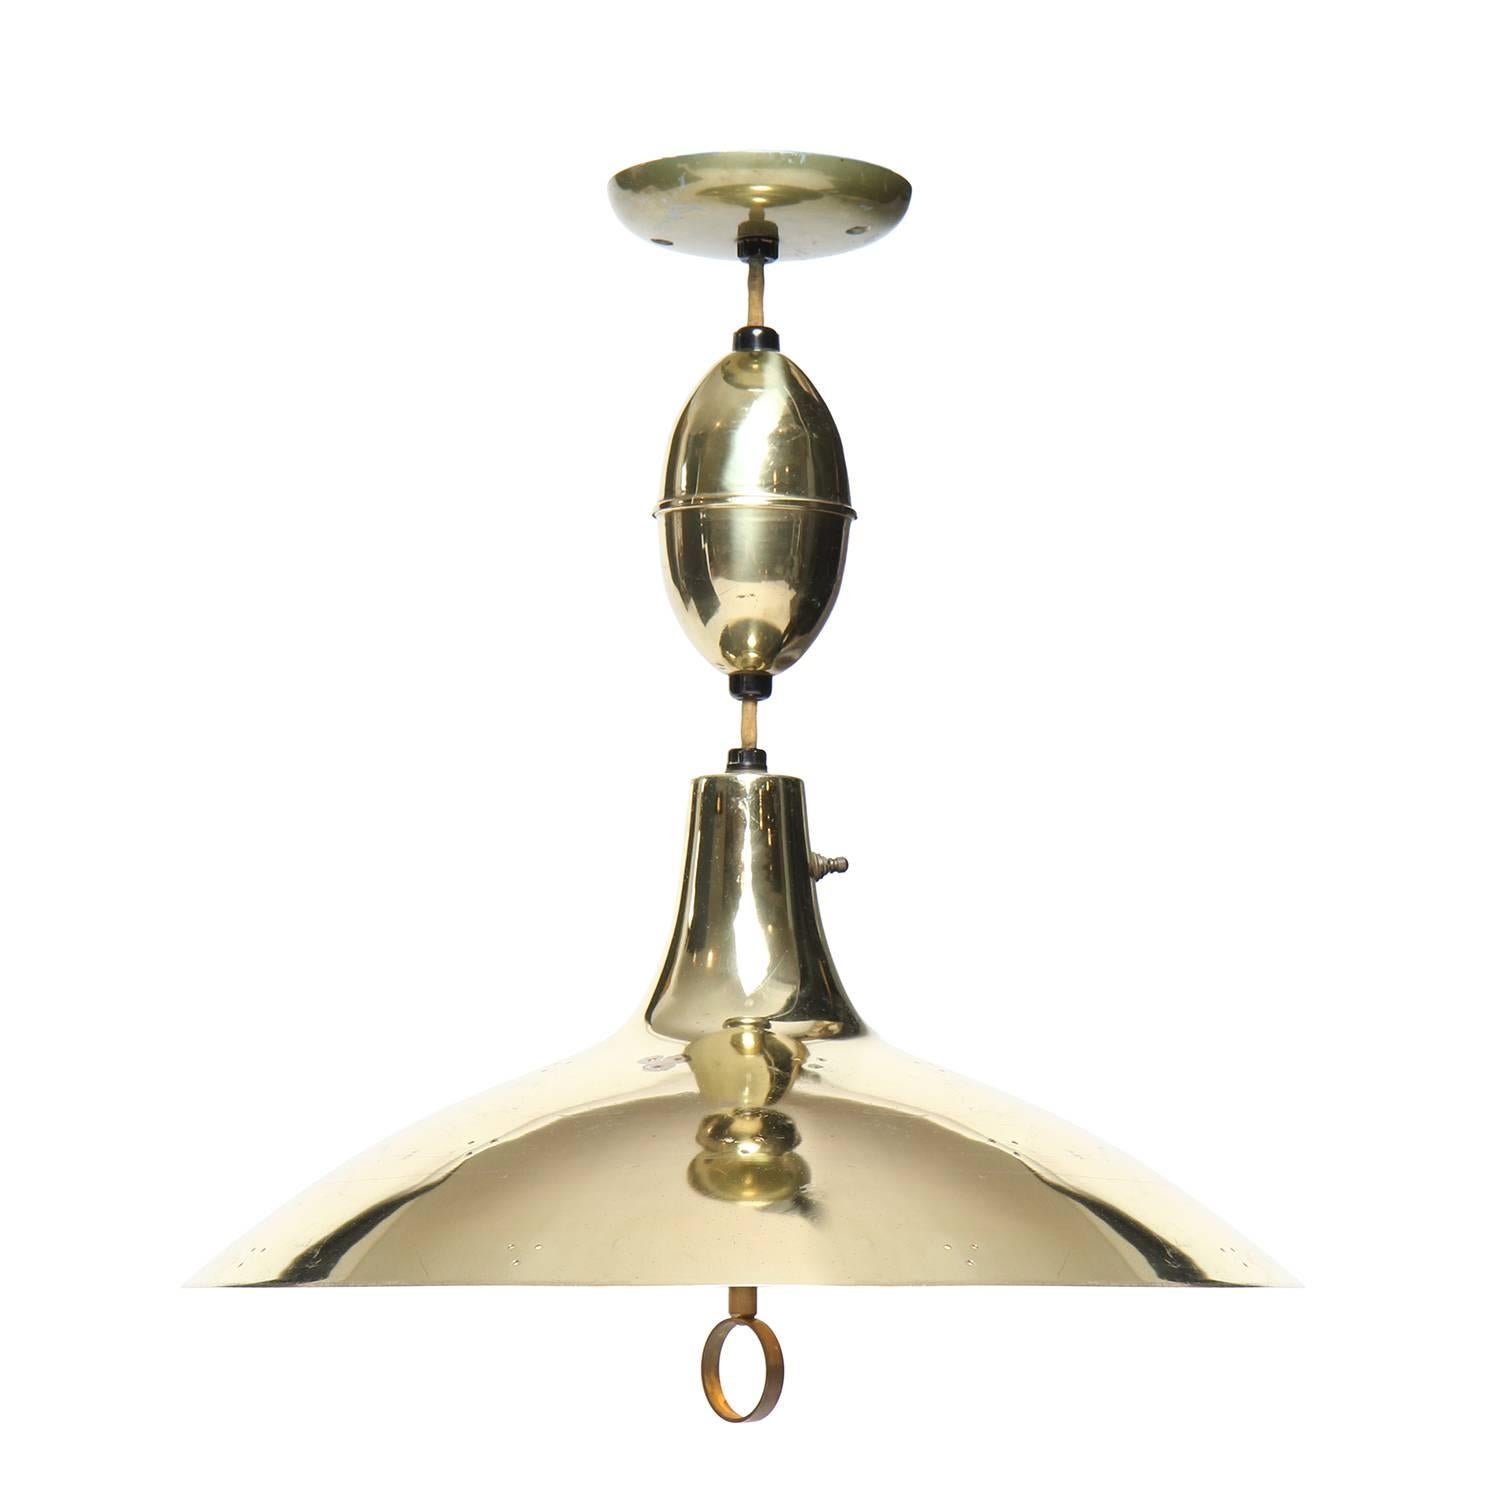 A fine brass adjustable ceiling fixture having a perforated dome shade and ring handle.